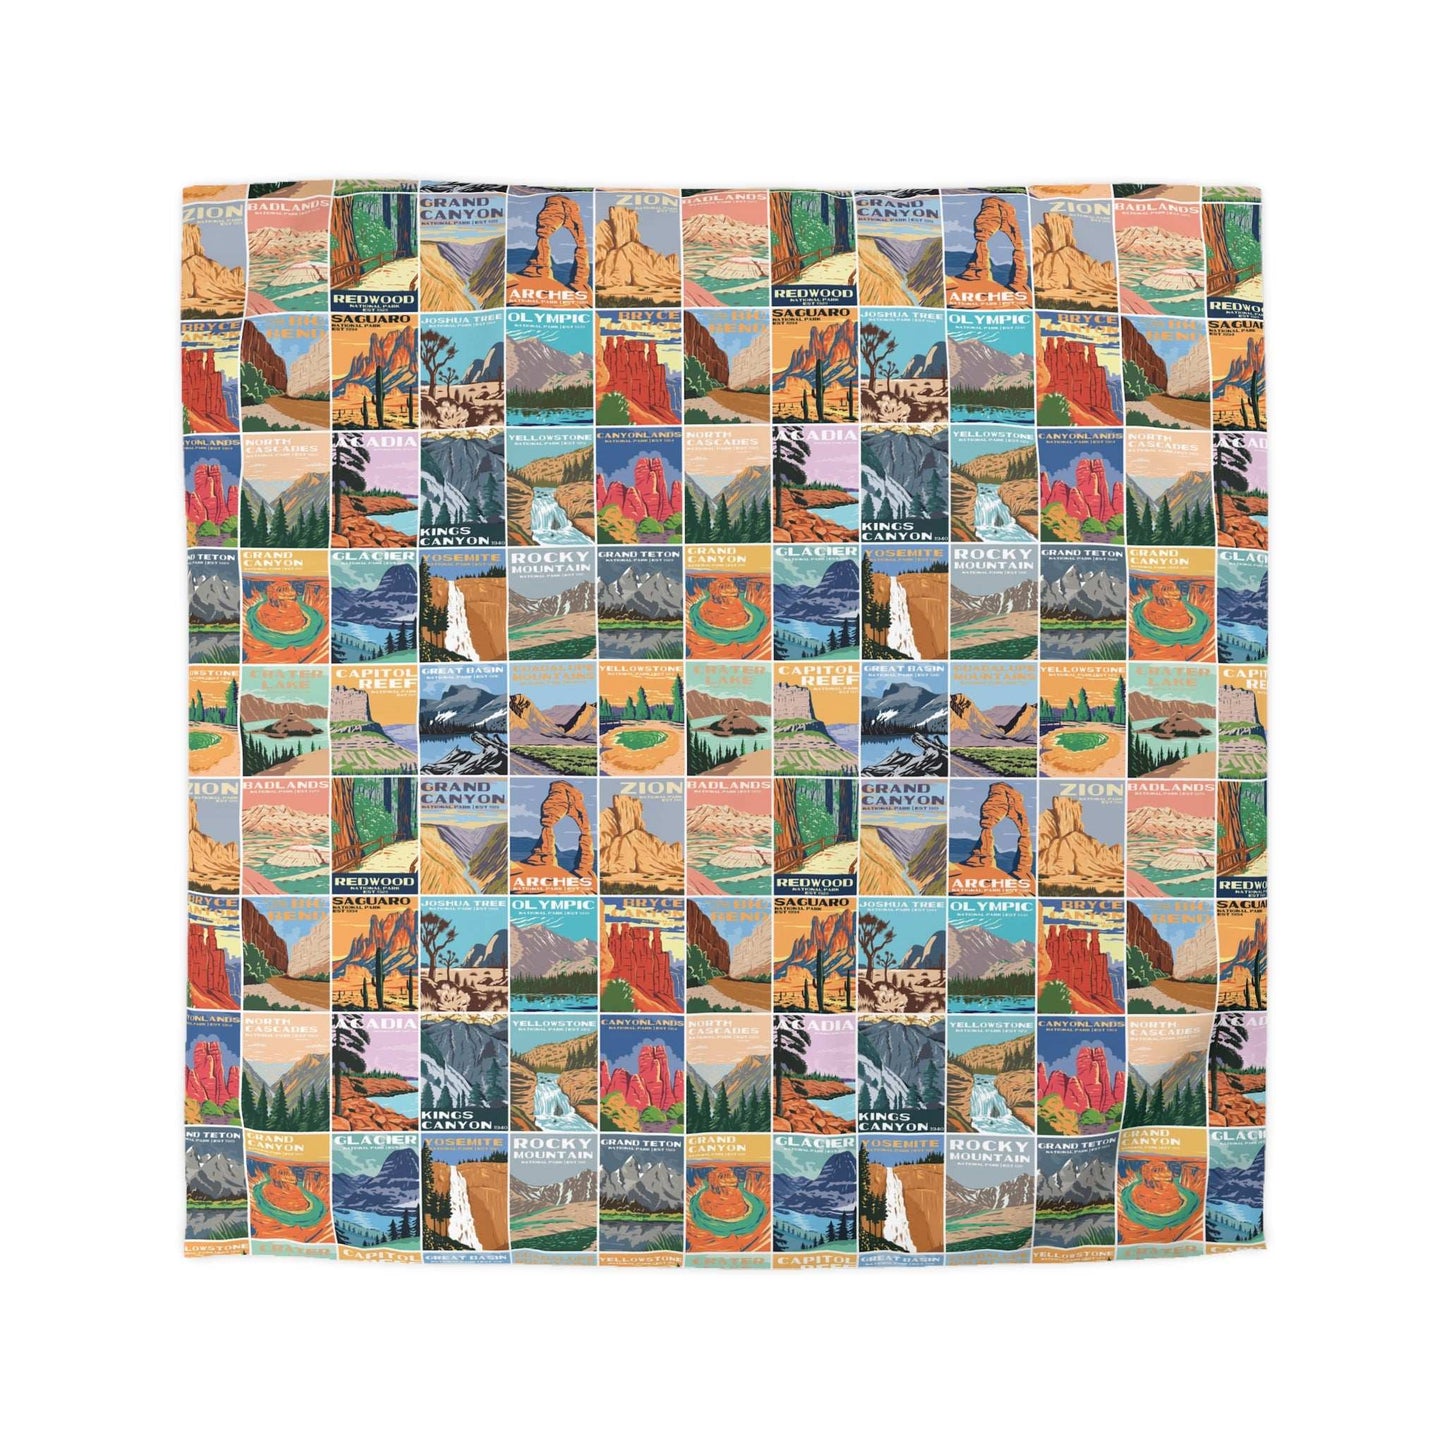 National Parks Microfiber Duvet CoverCozy up and remember all your favorite memories from your National Park adventures with this vintage styled National Park posters duvet cover for a deep and relaxing